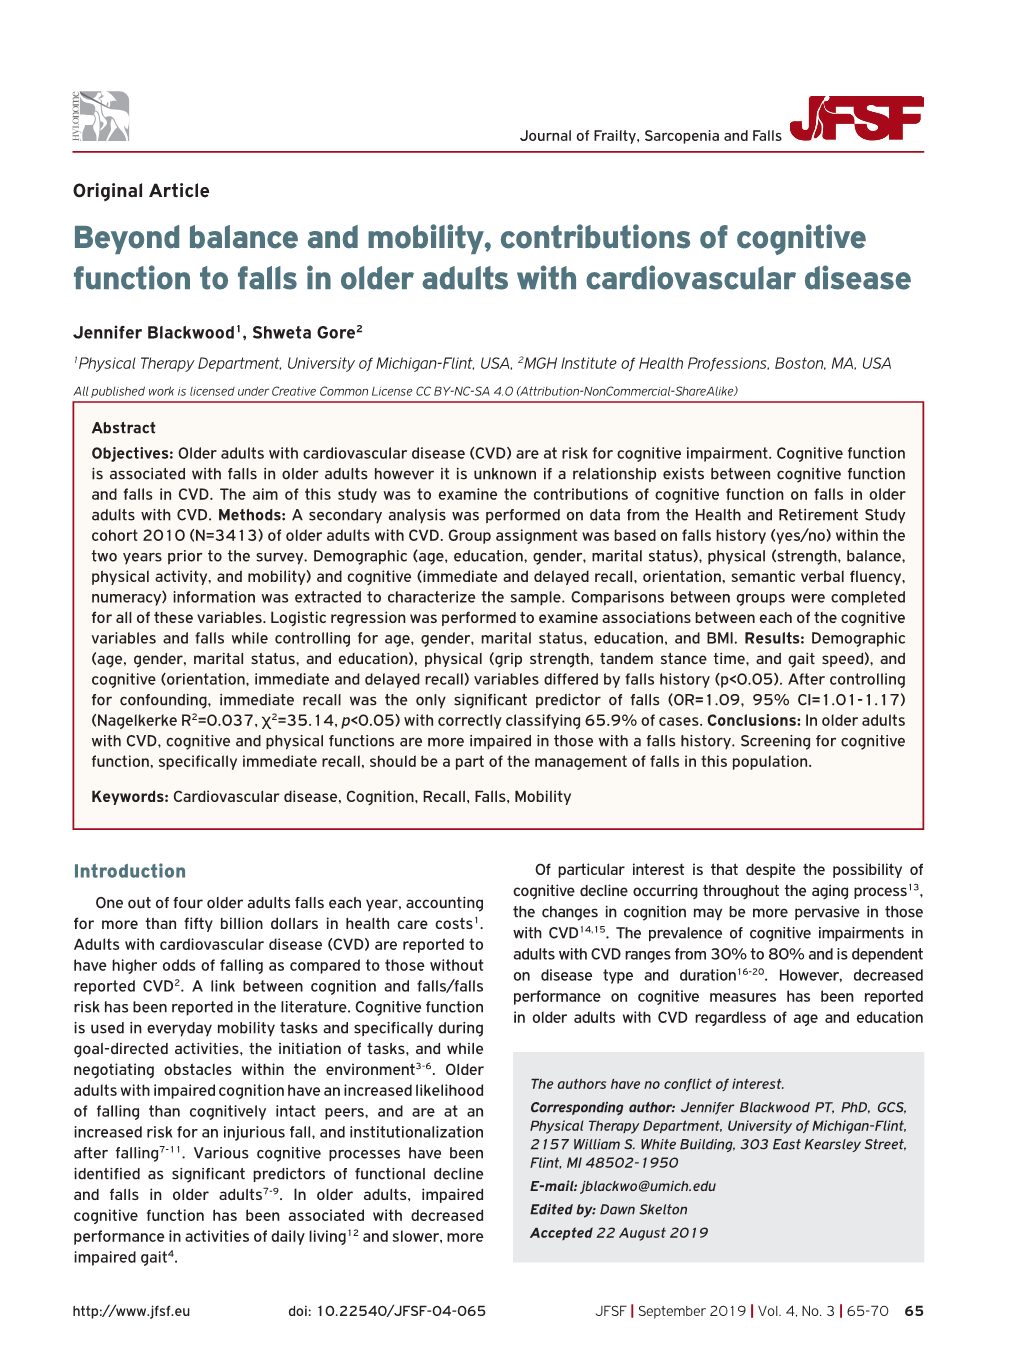 Beyond Balance and Mobility, Contributions of Cognitive Function to Falls in Older Adults with Cardiovascular Disease